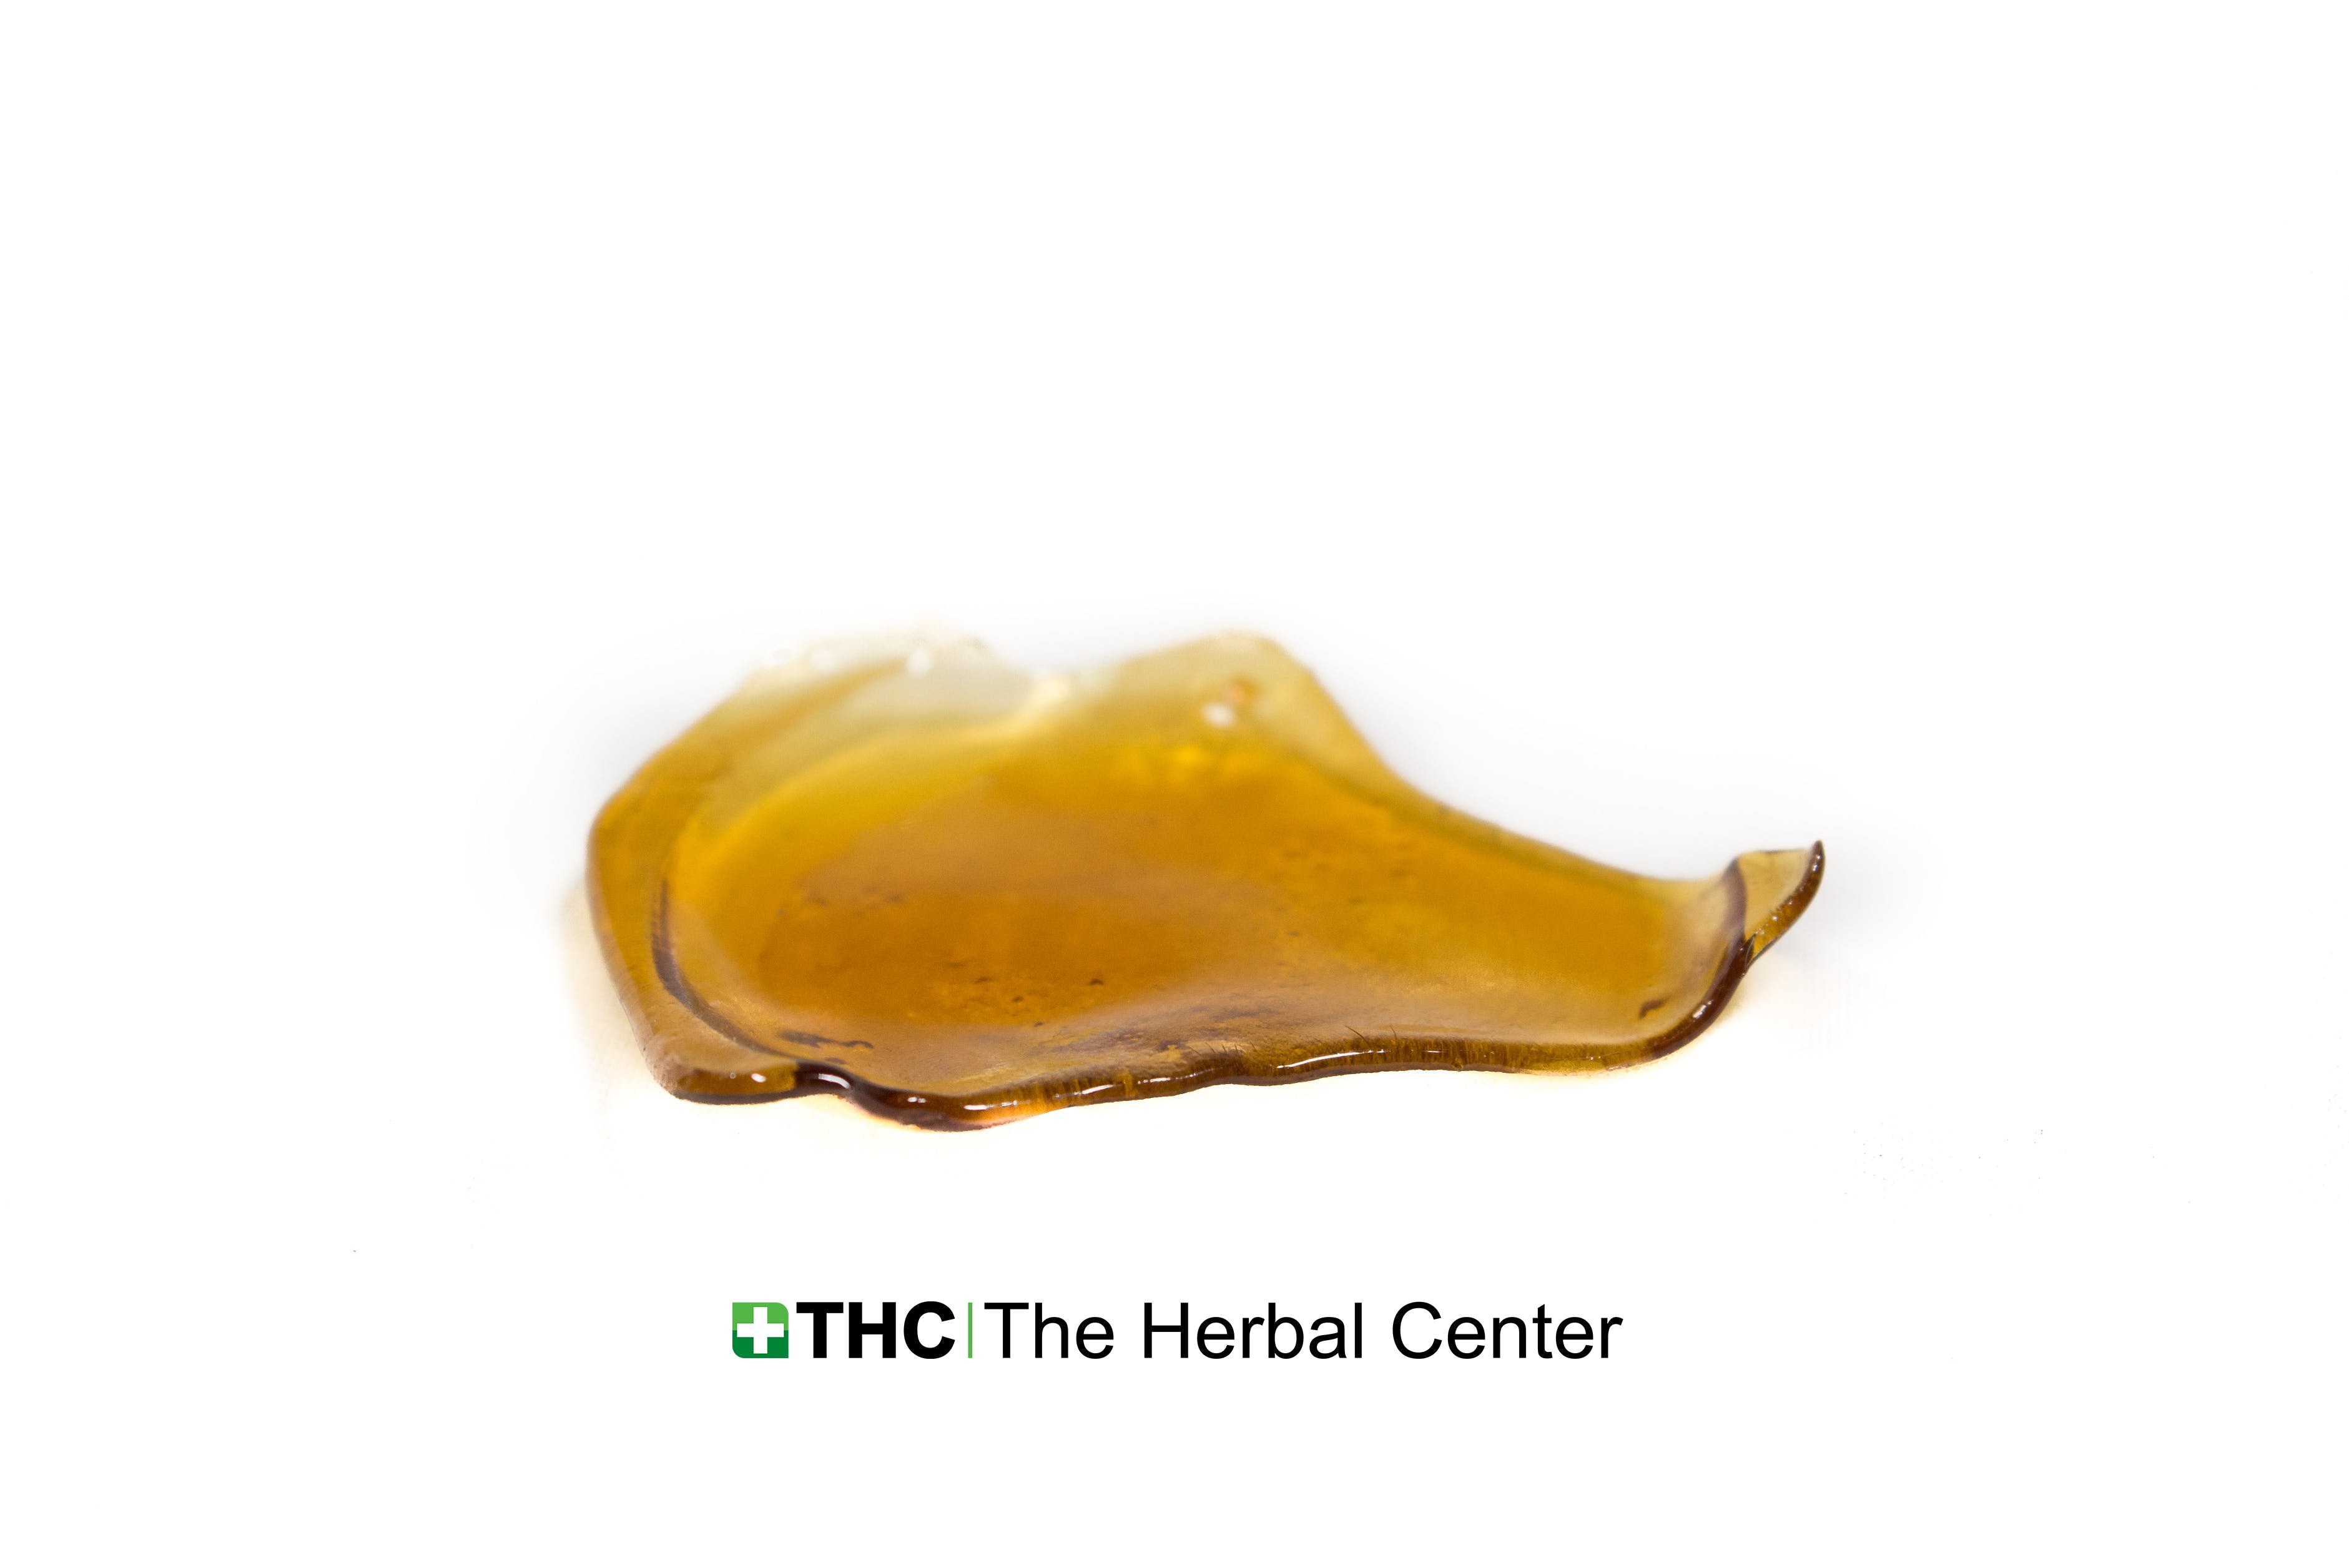 concentrate-csc-shatter-danky-kong